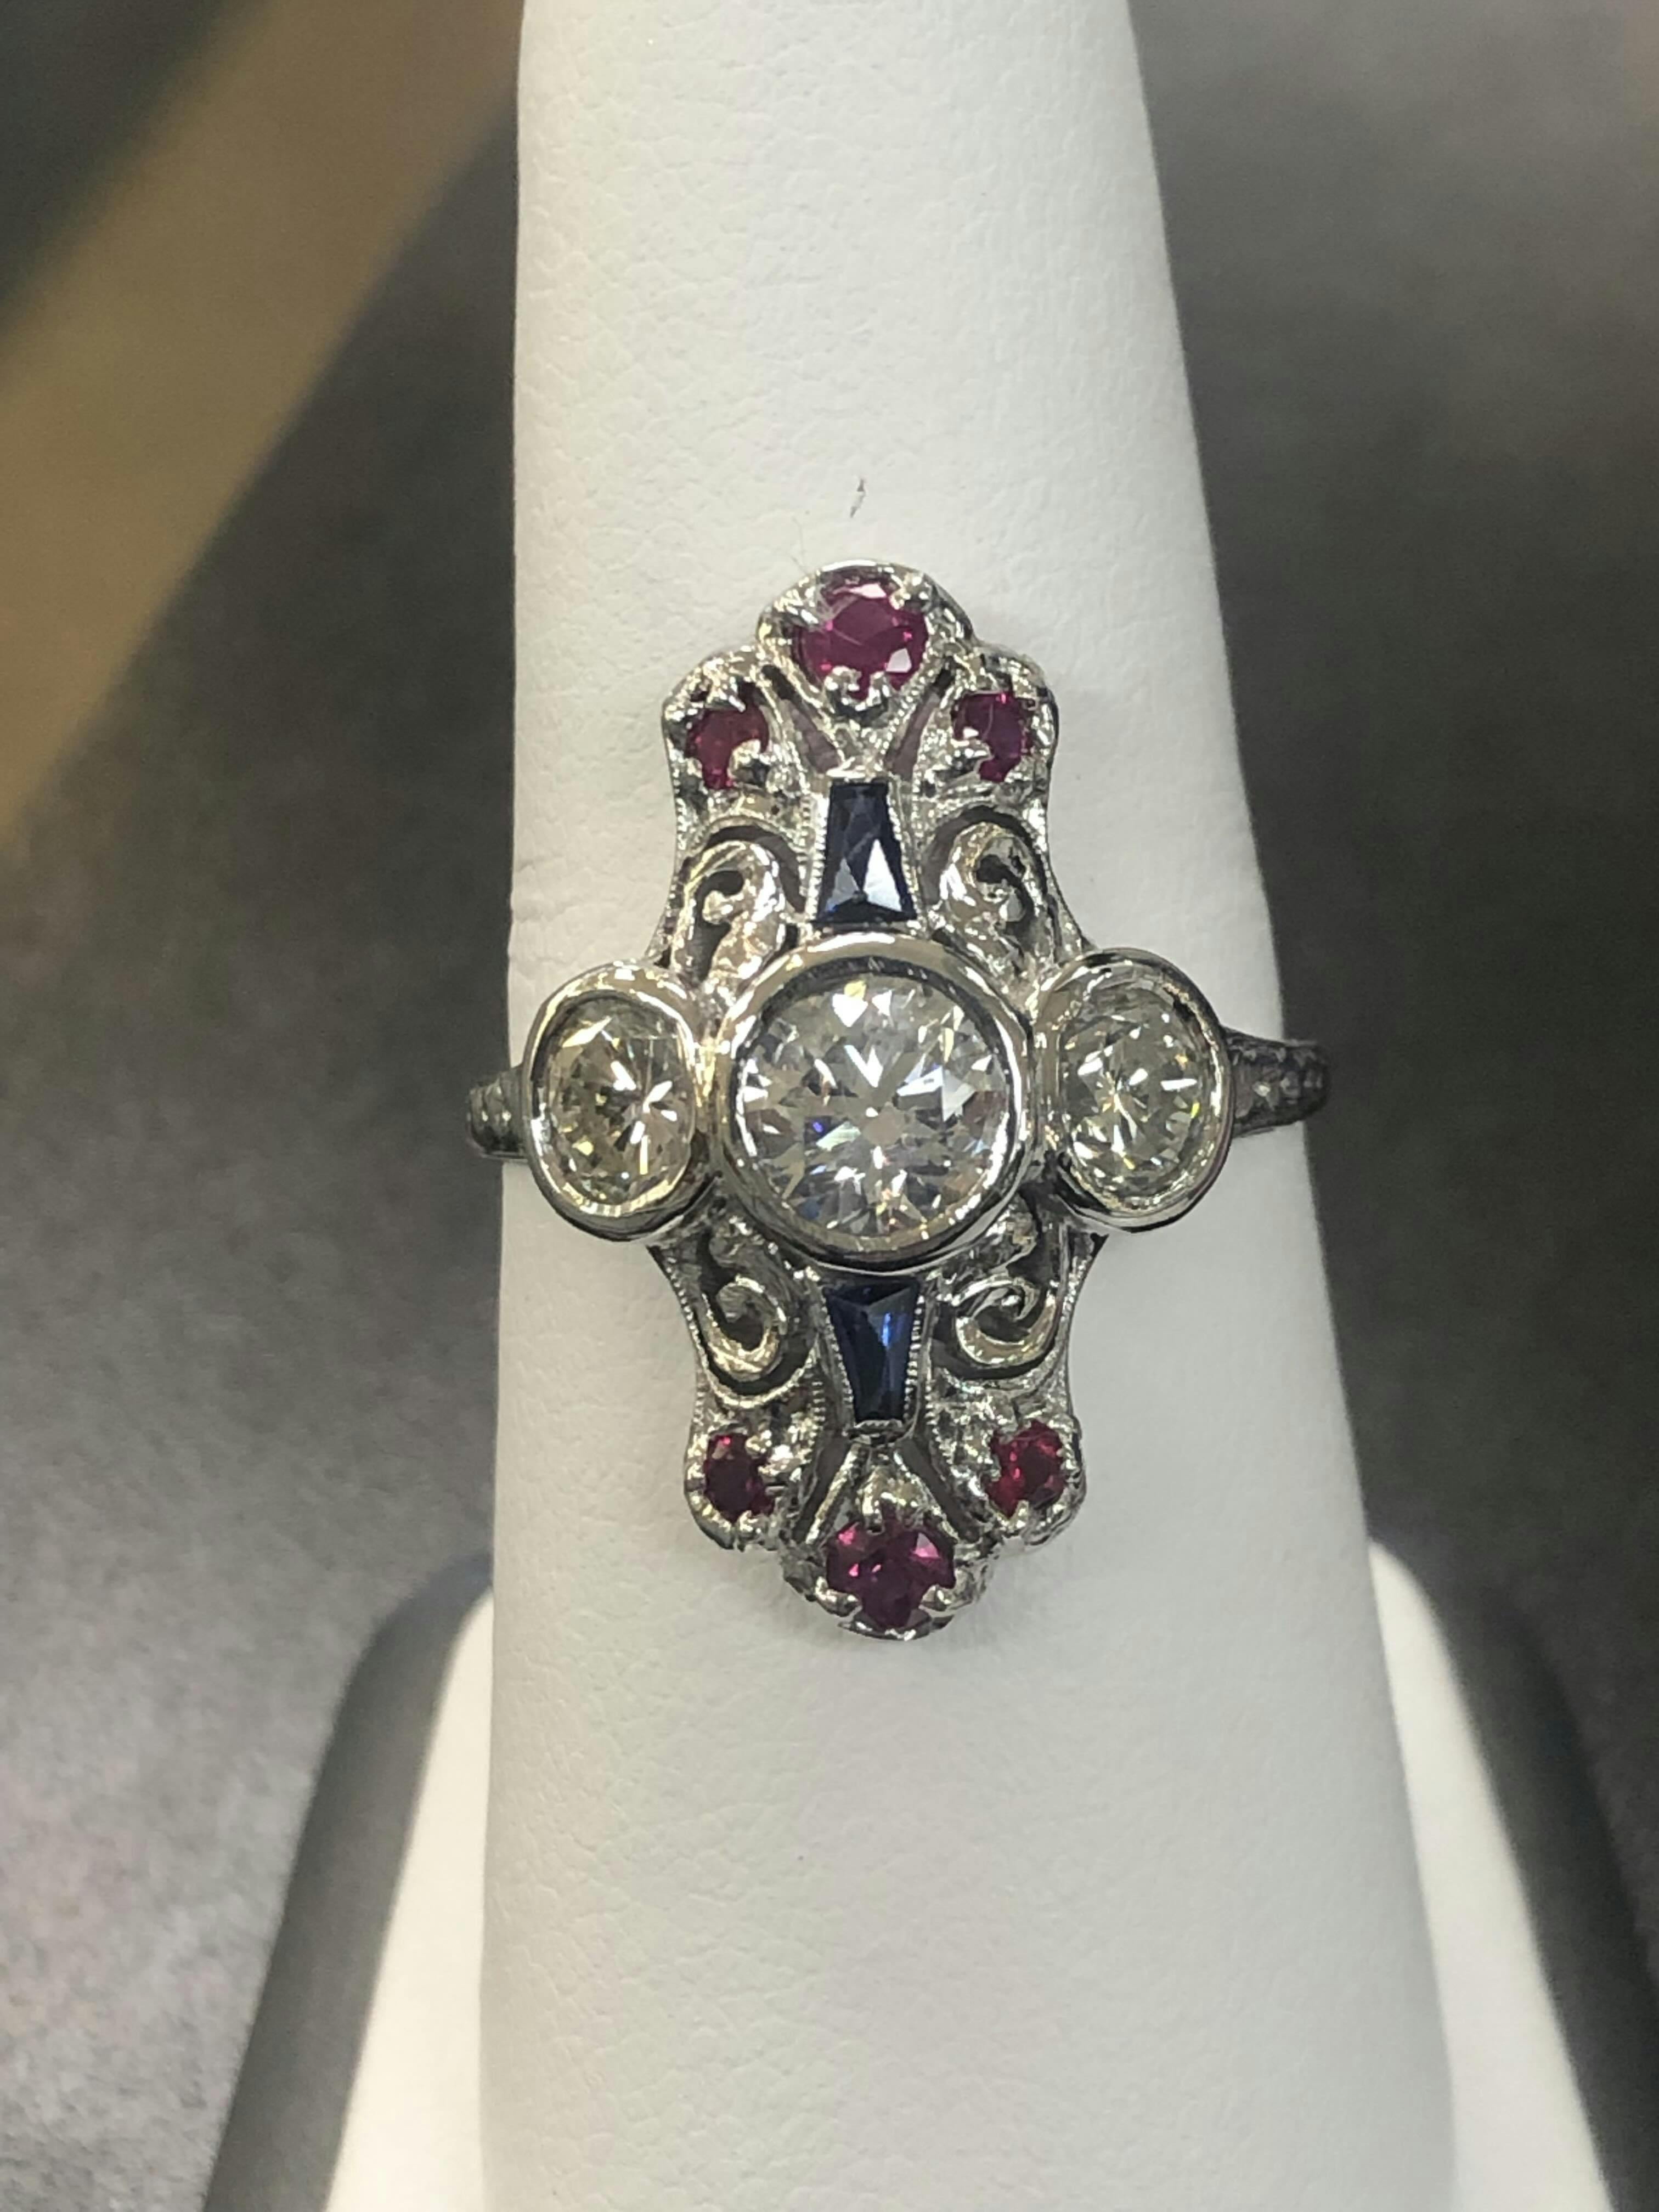 restored ring after service